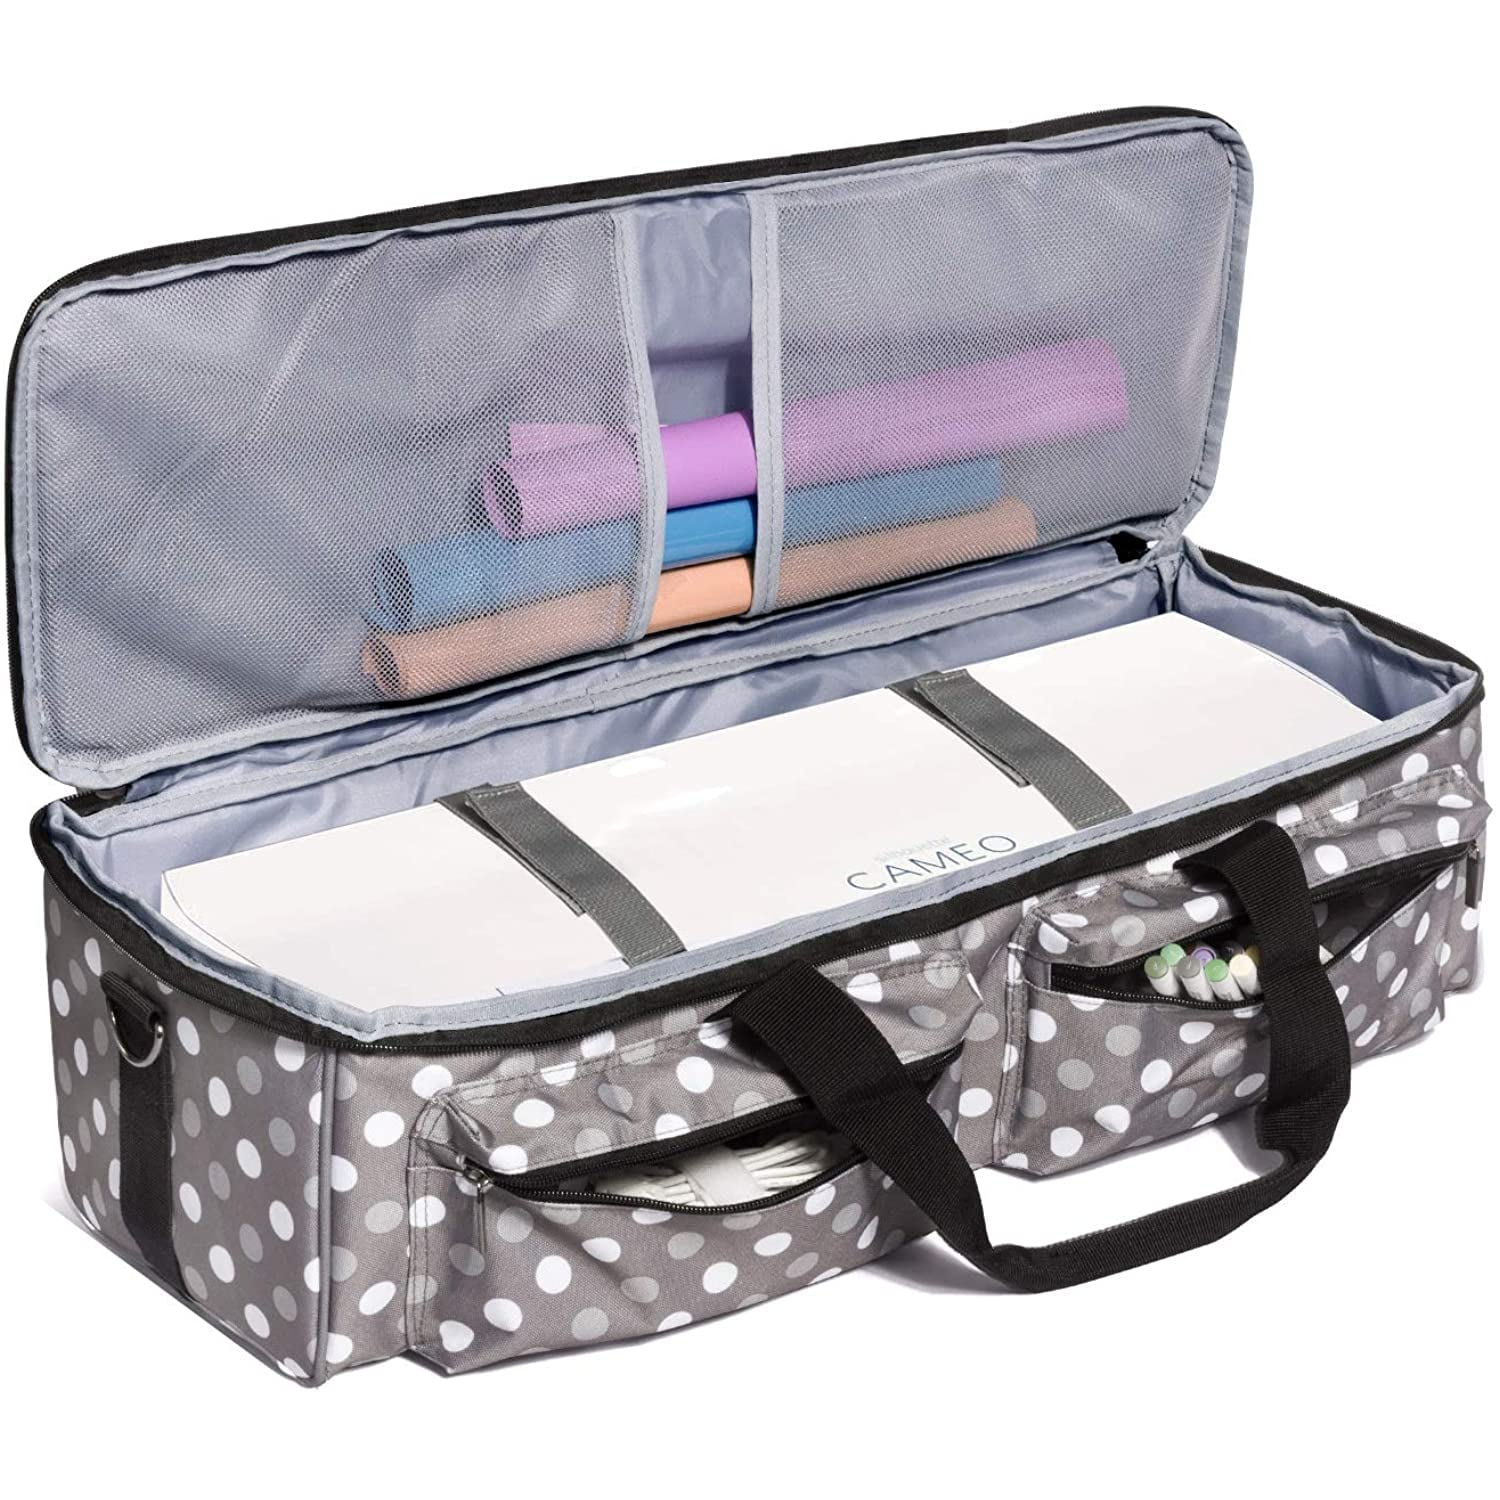 Cricut Maker and Silhouette Cameo 3 Air2 Compatible with Cricut Explore Air Carrying Case for Cutting Machine and Accessories Luxja Bag for Silhouette Cameo 3 Patent Pending Gray 